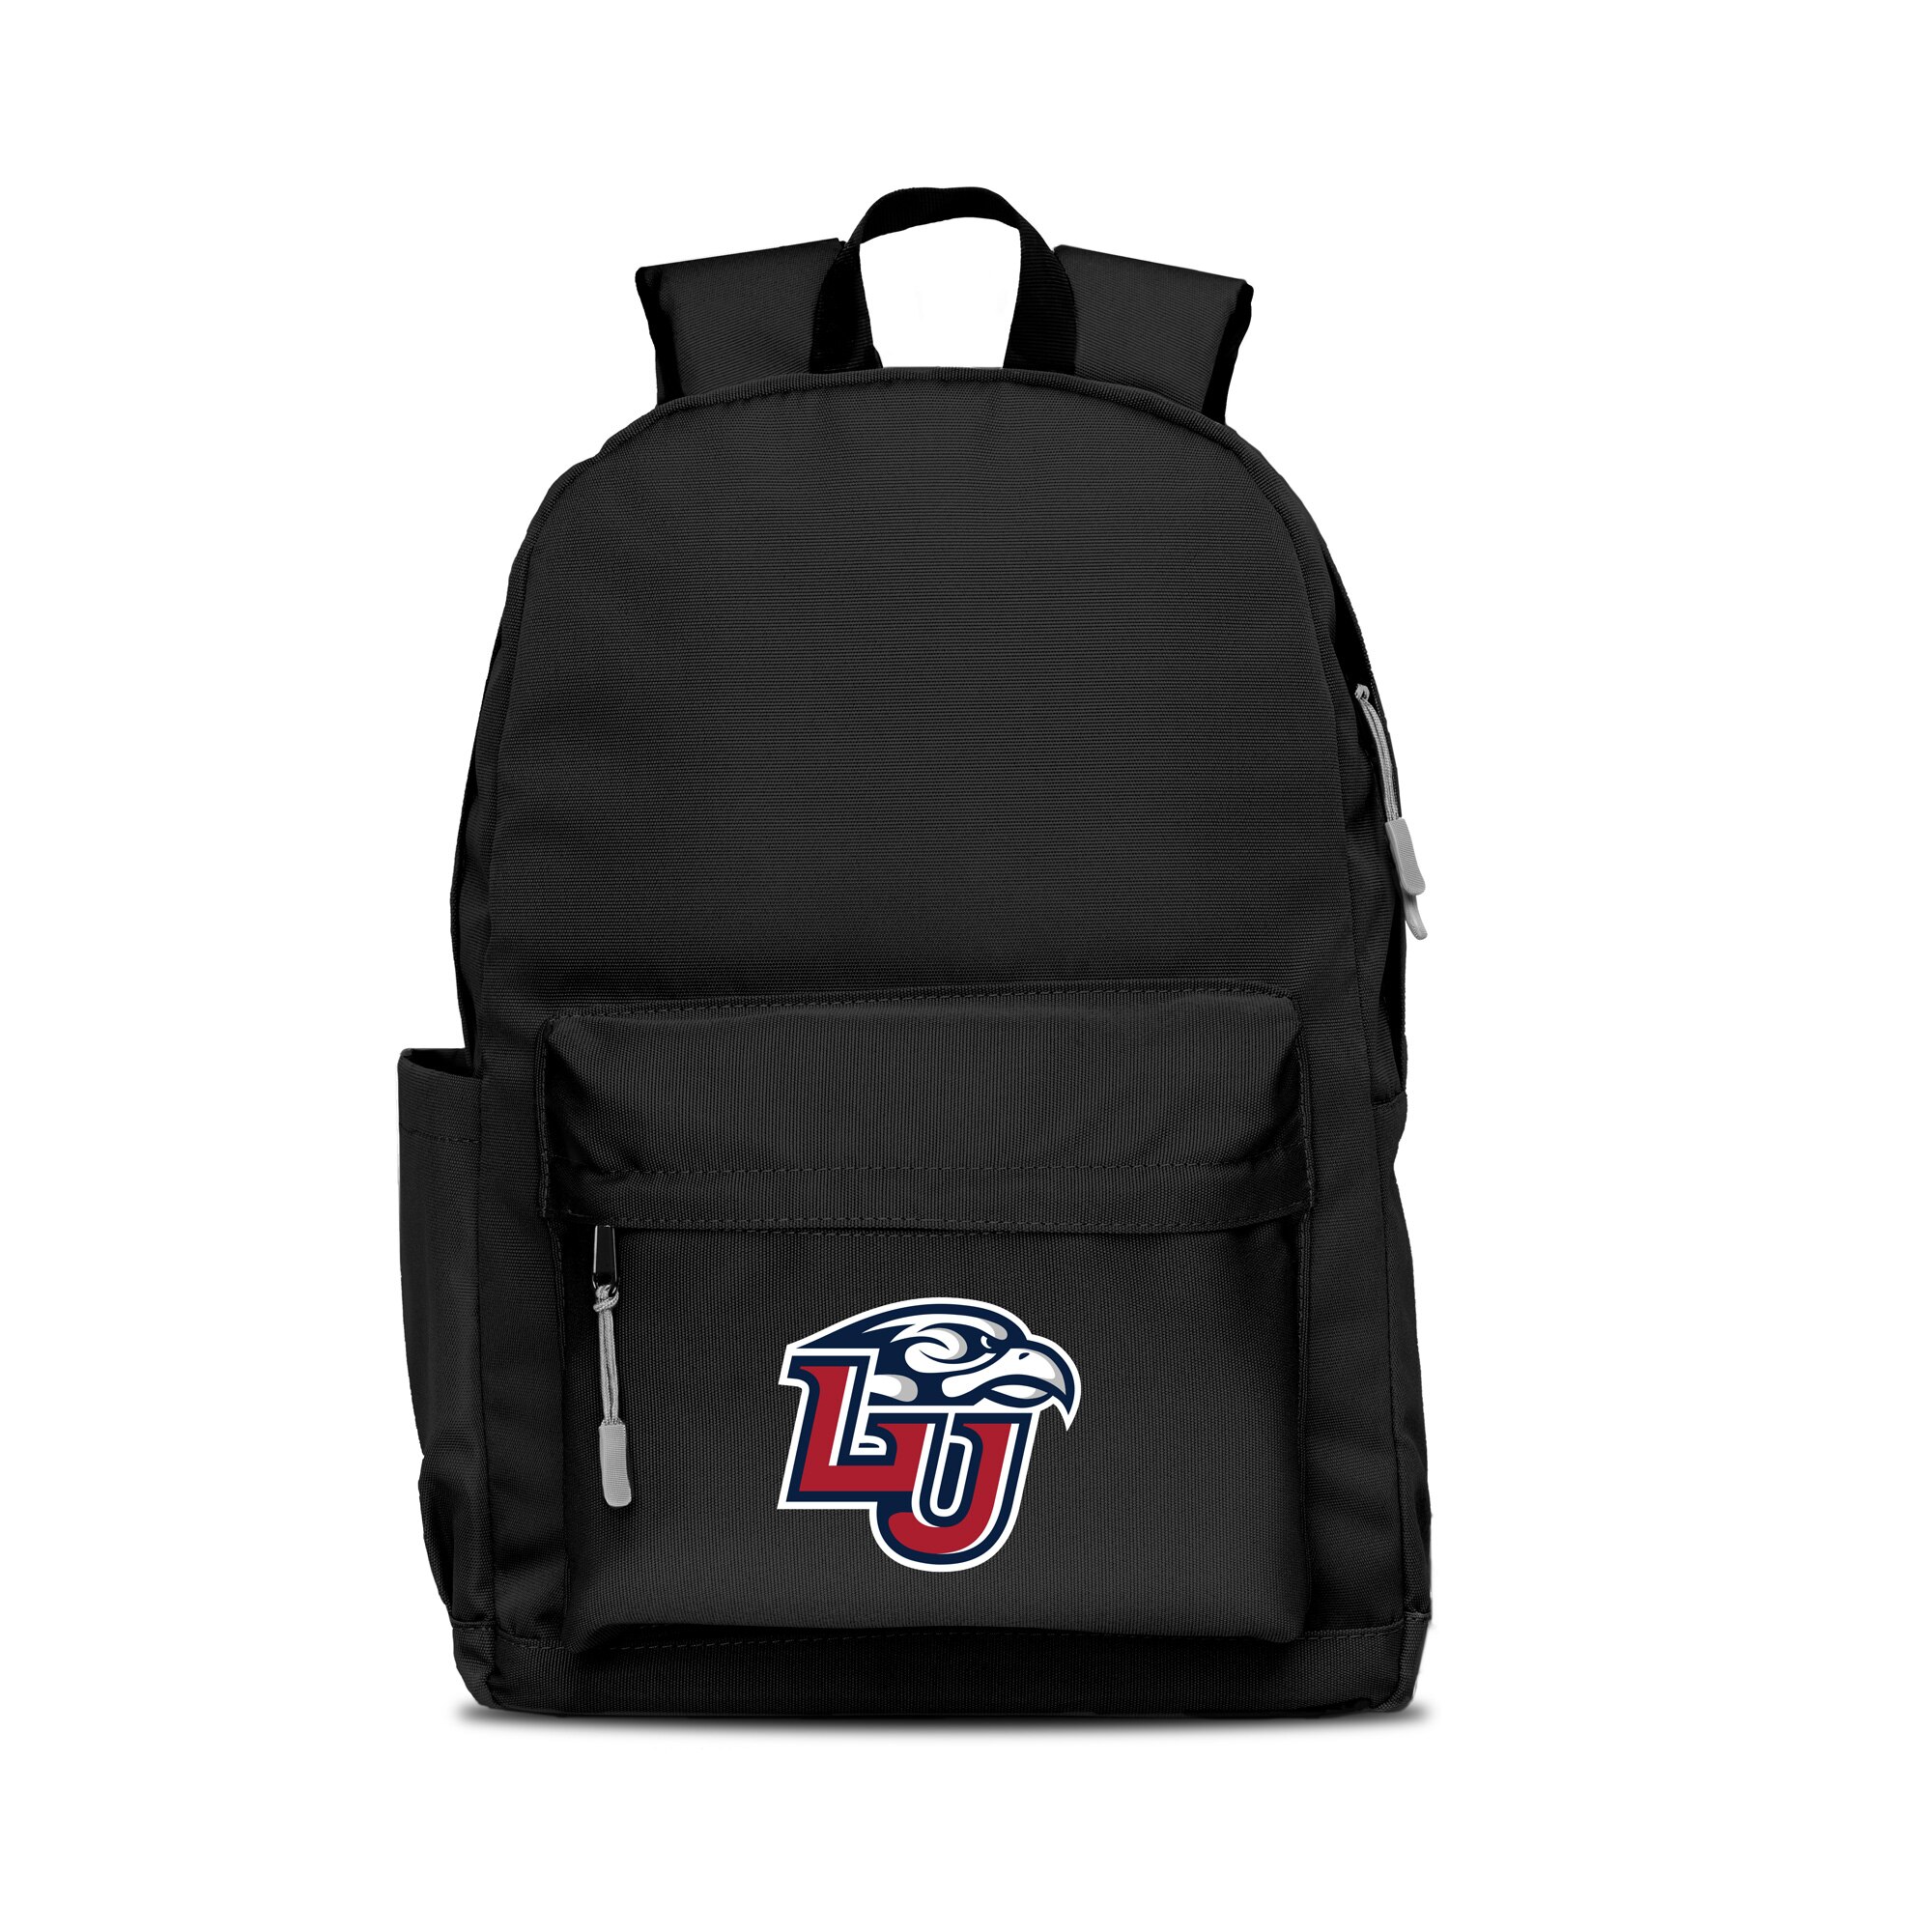 LIBERTY UNIVERSITY FLAMES L716 Campus Backpack Backpacks and Bags